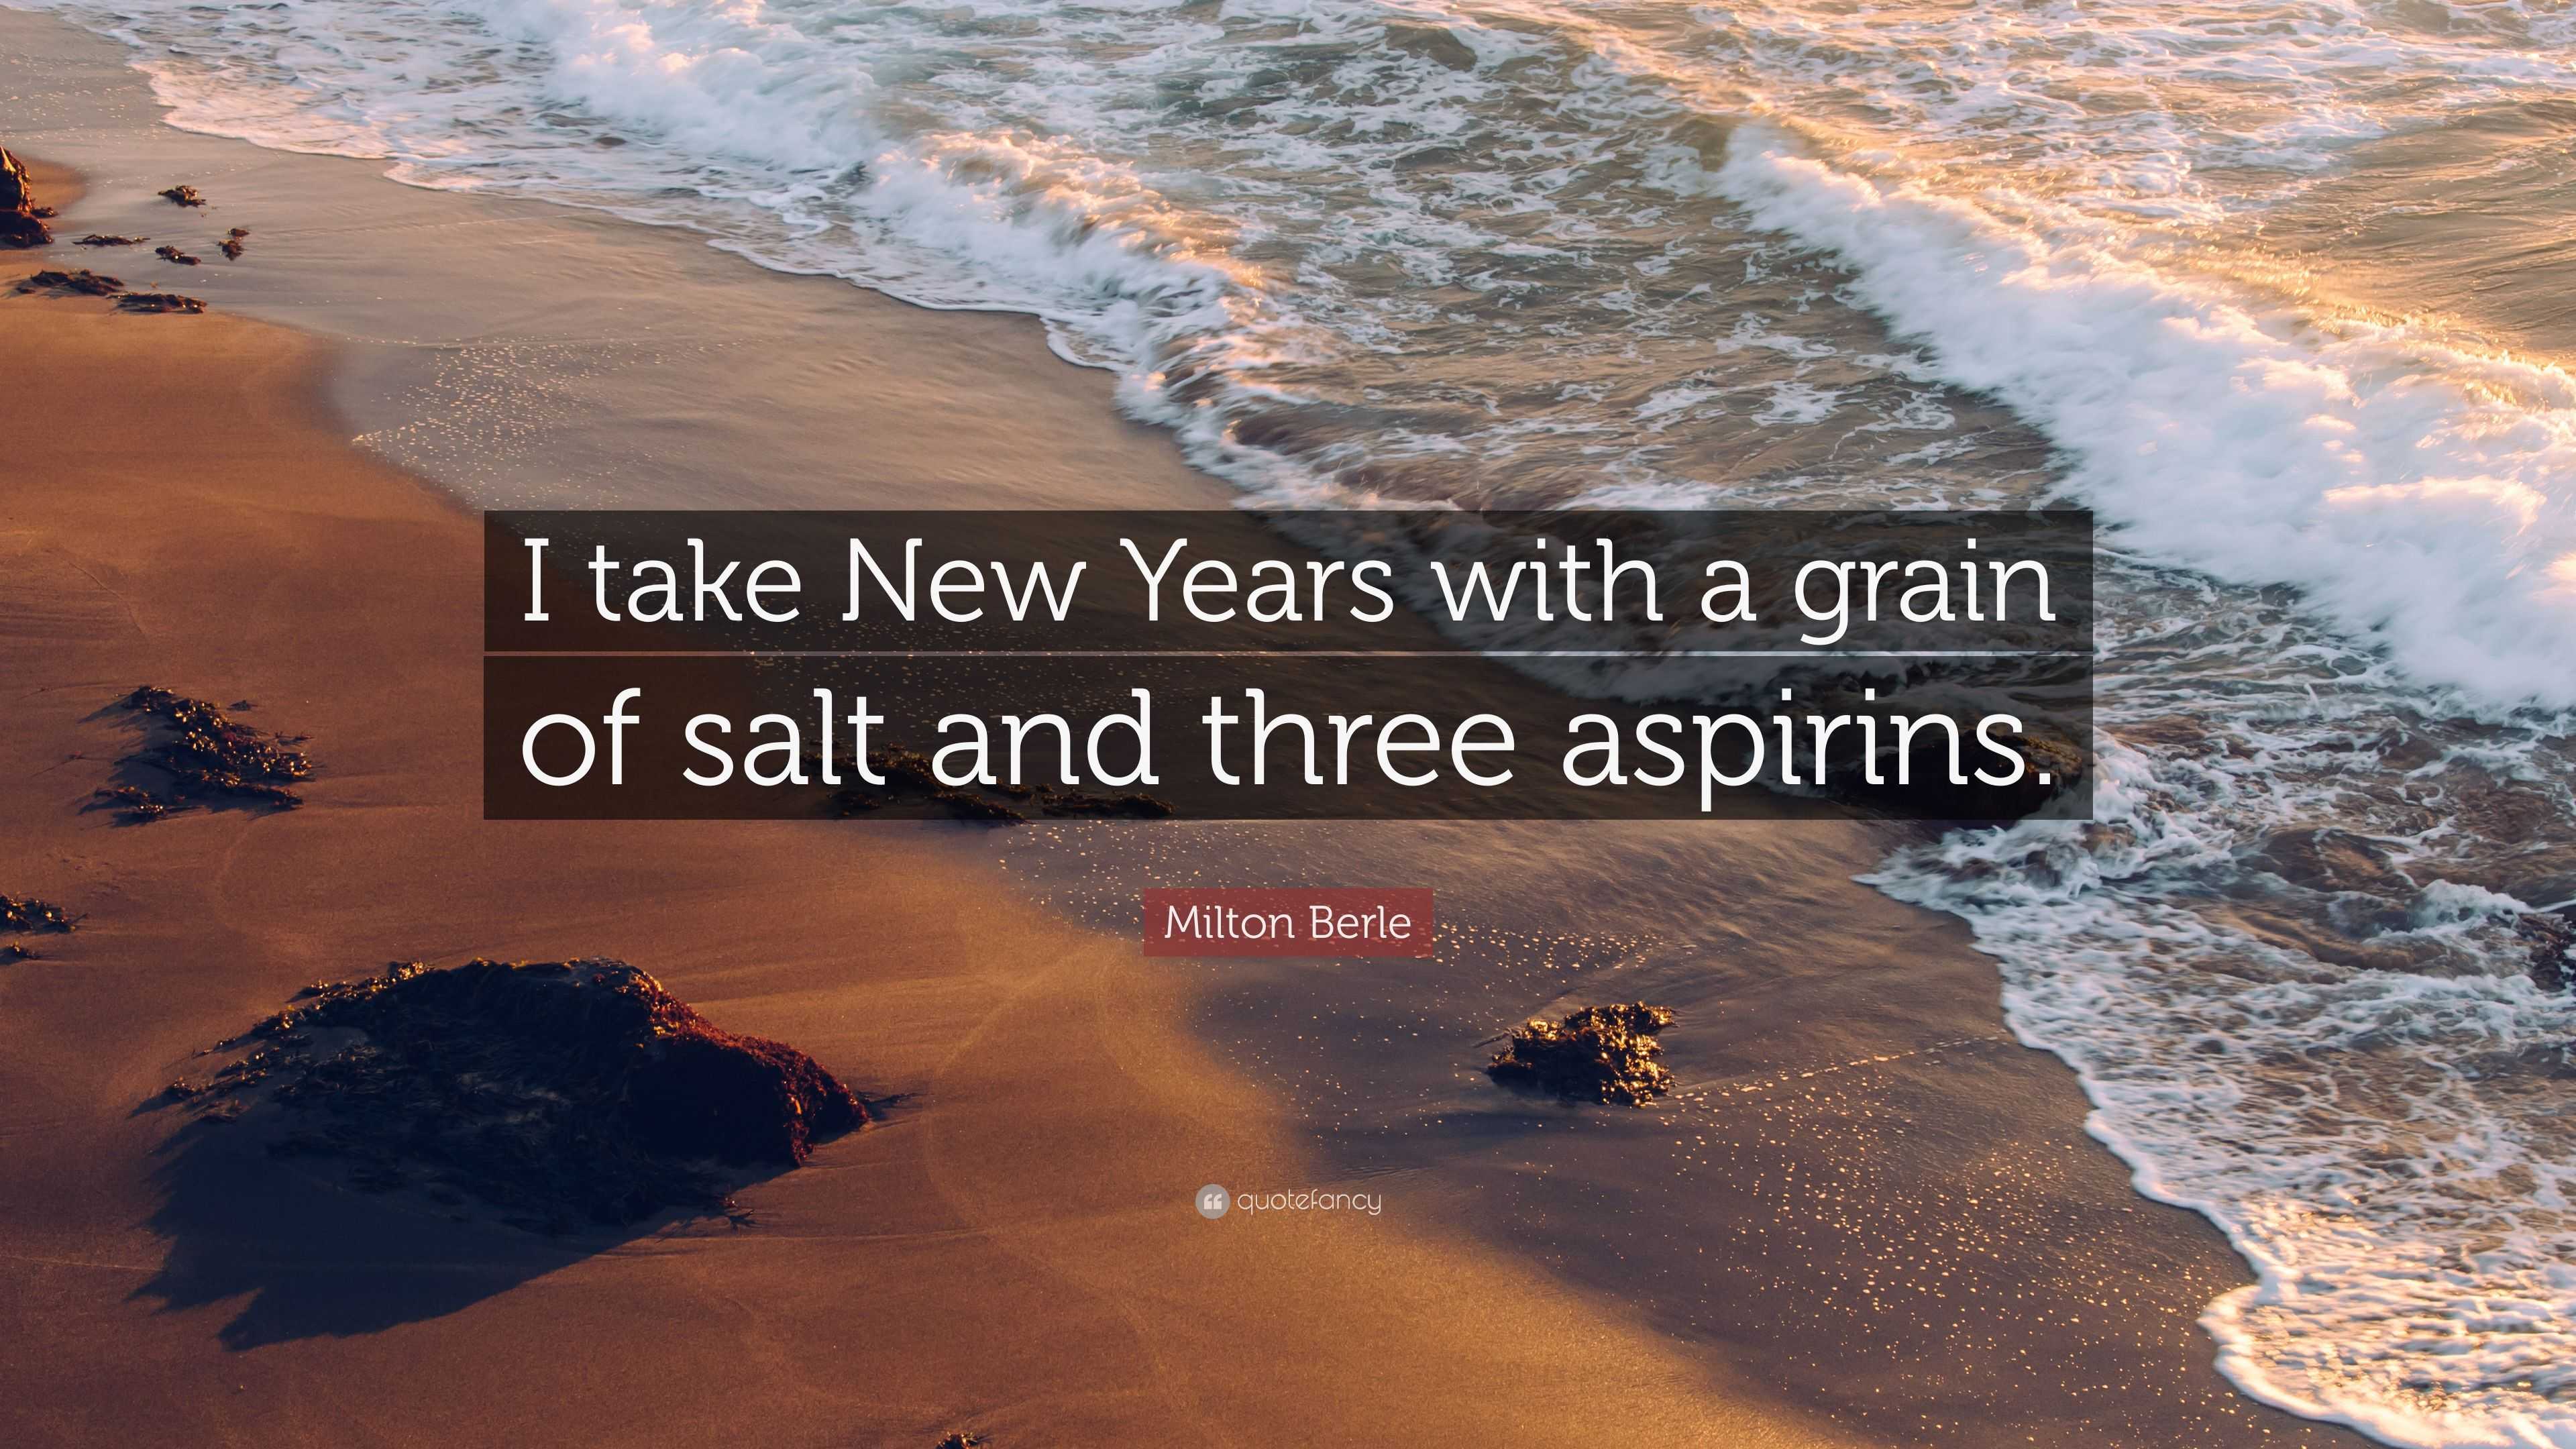 Milton Berle Quote: “I take New Years with a grain of salt and